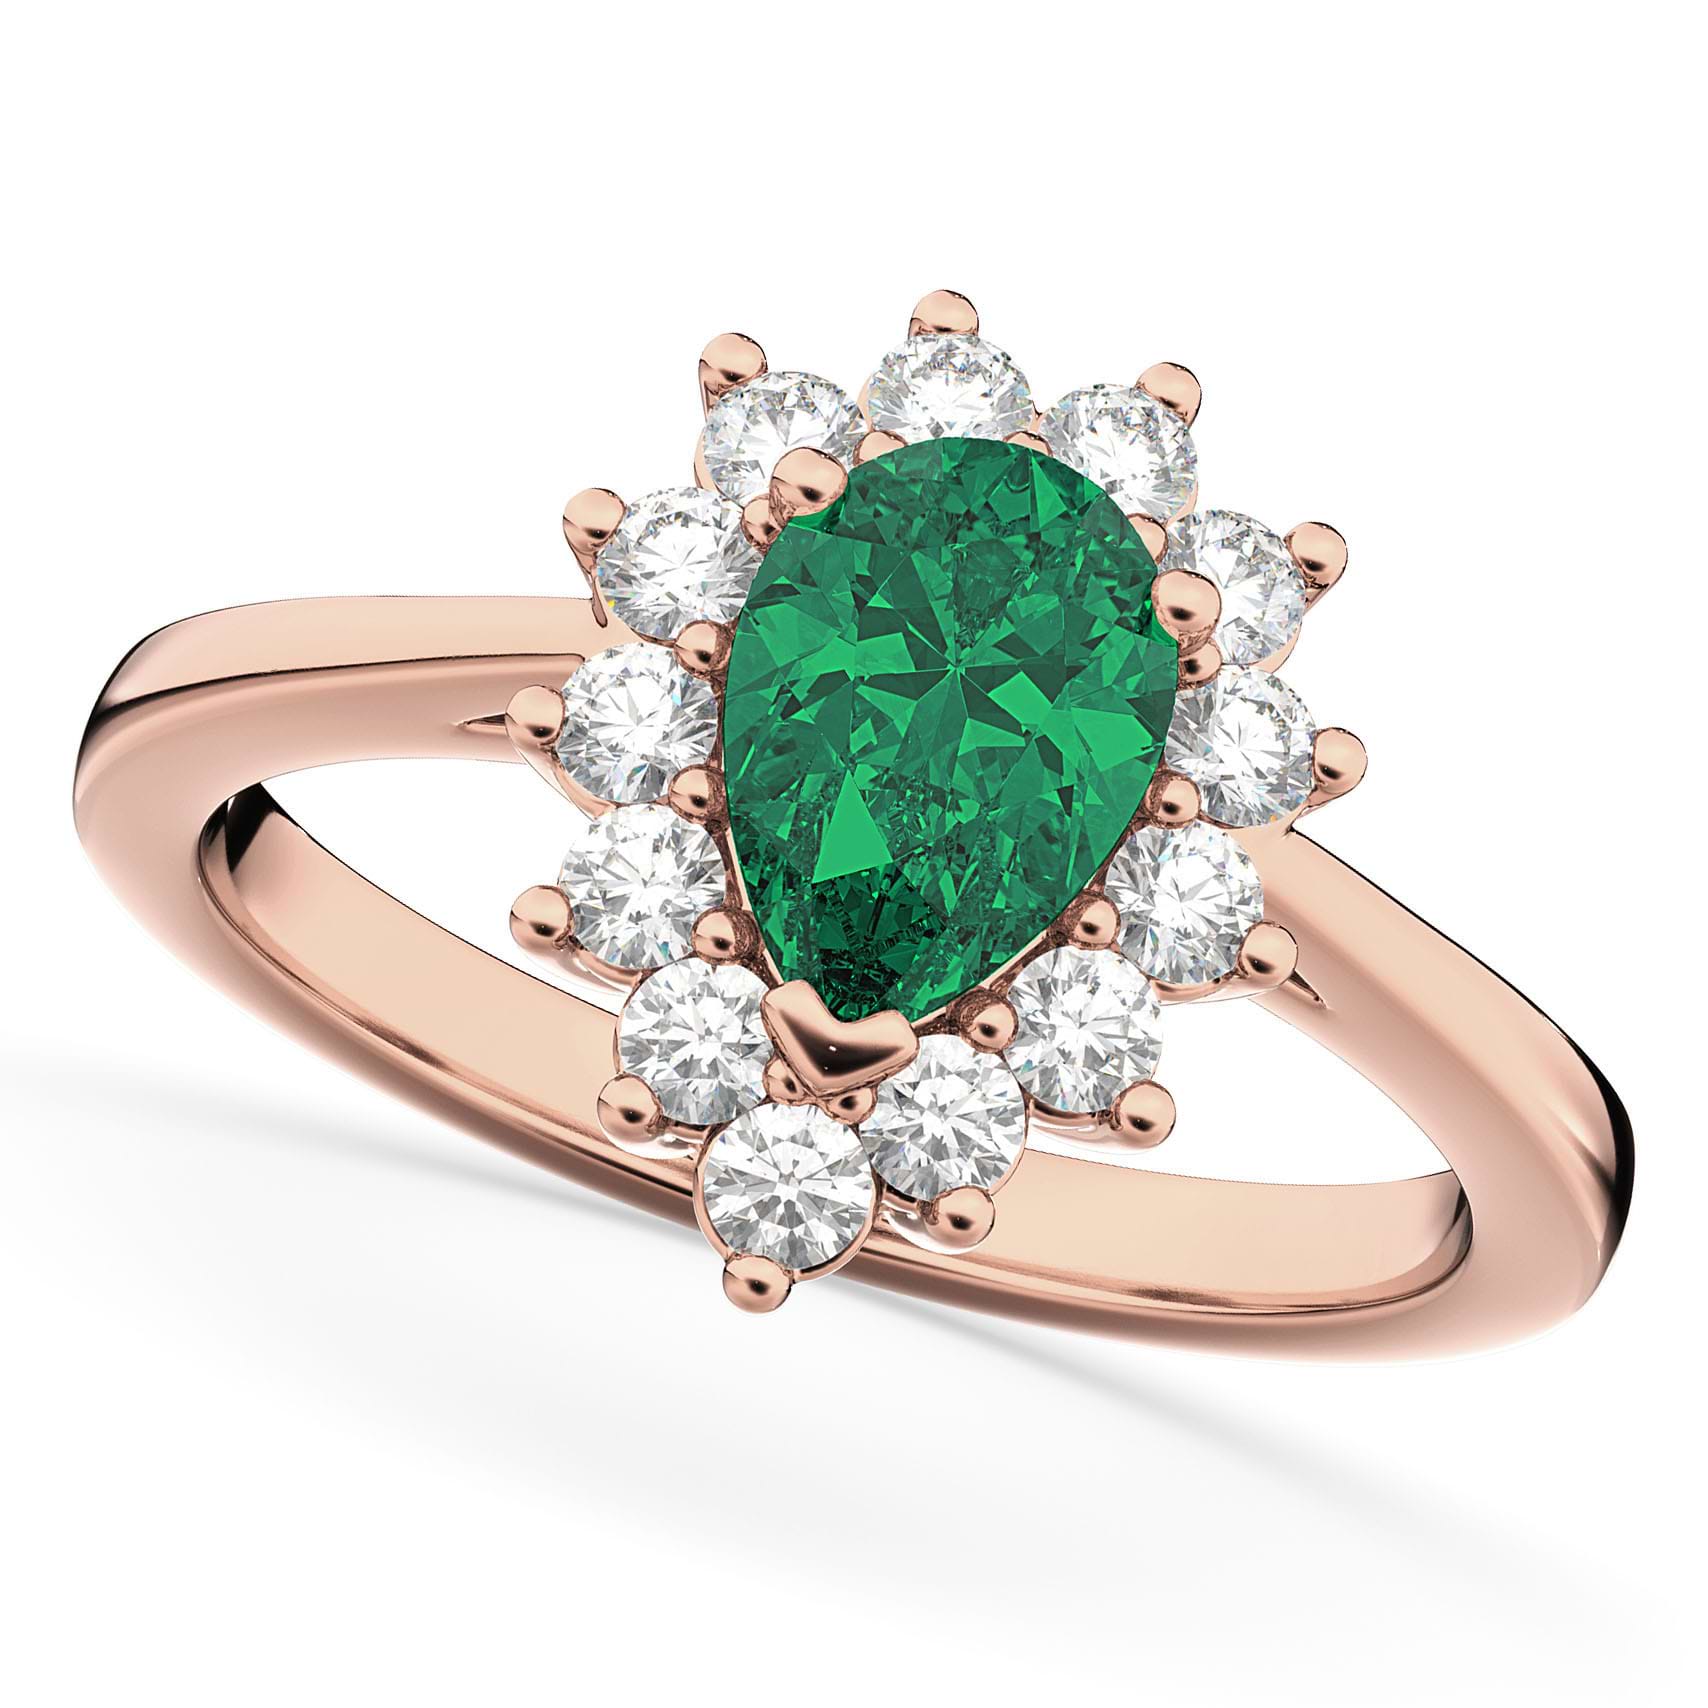 Halo Emerald & Diamond Floral Pear Shaped Fashion Ring 14k Rose Gold (1.12ct)